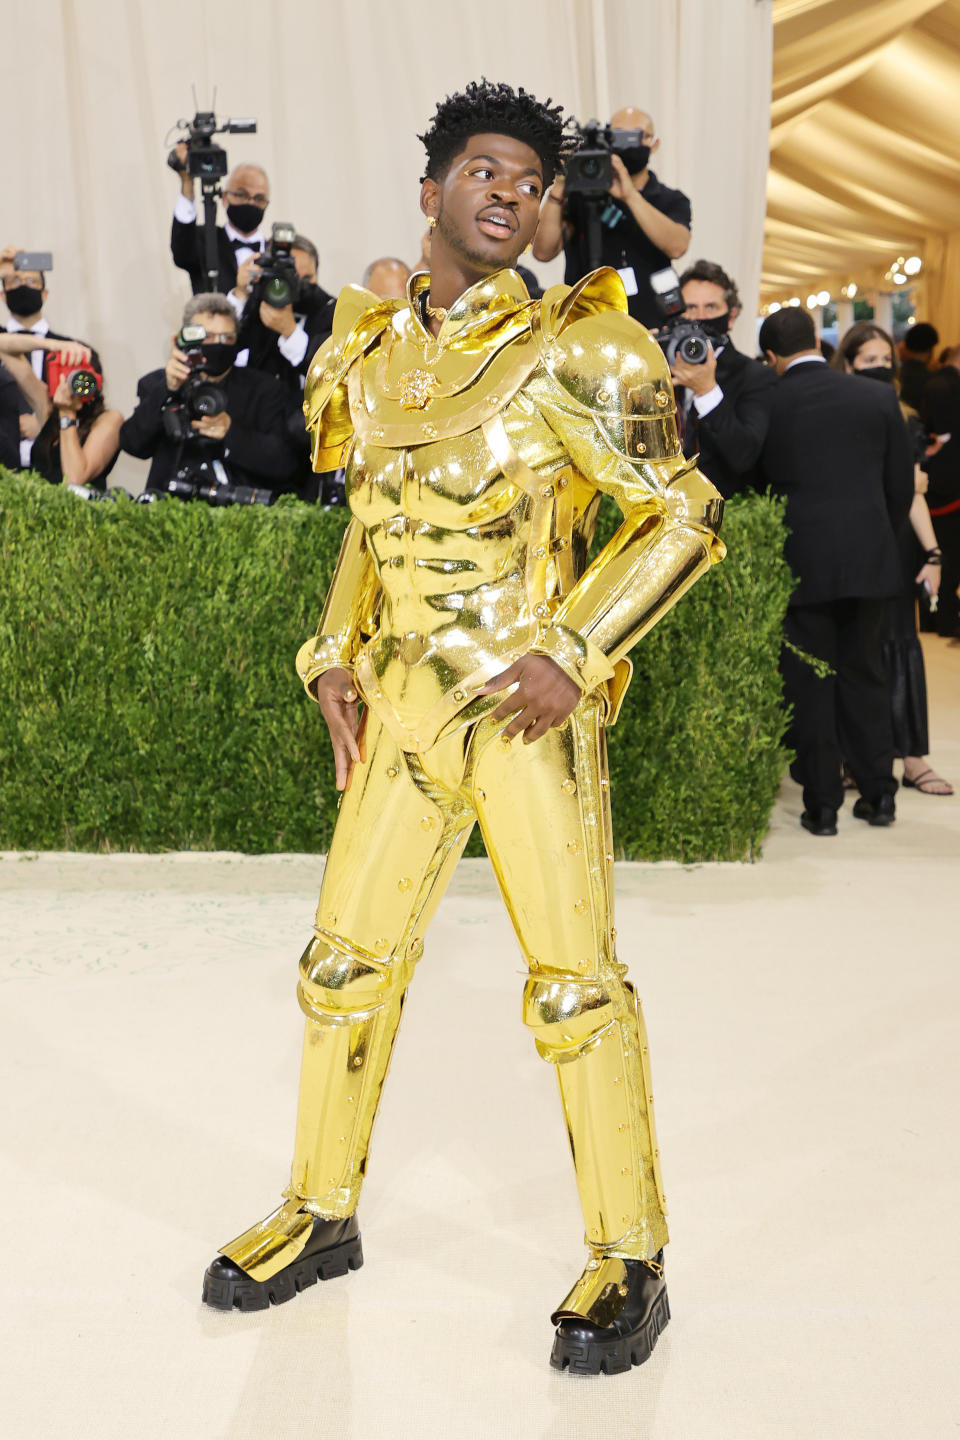 Lil Nas X in a metallic outfit resembling a futuristic robot with oversized shoulders and boots